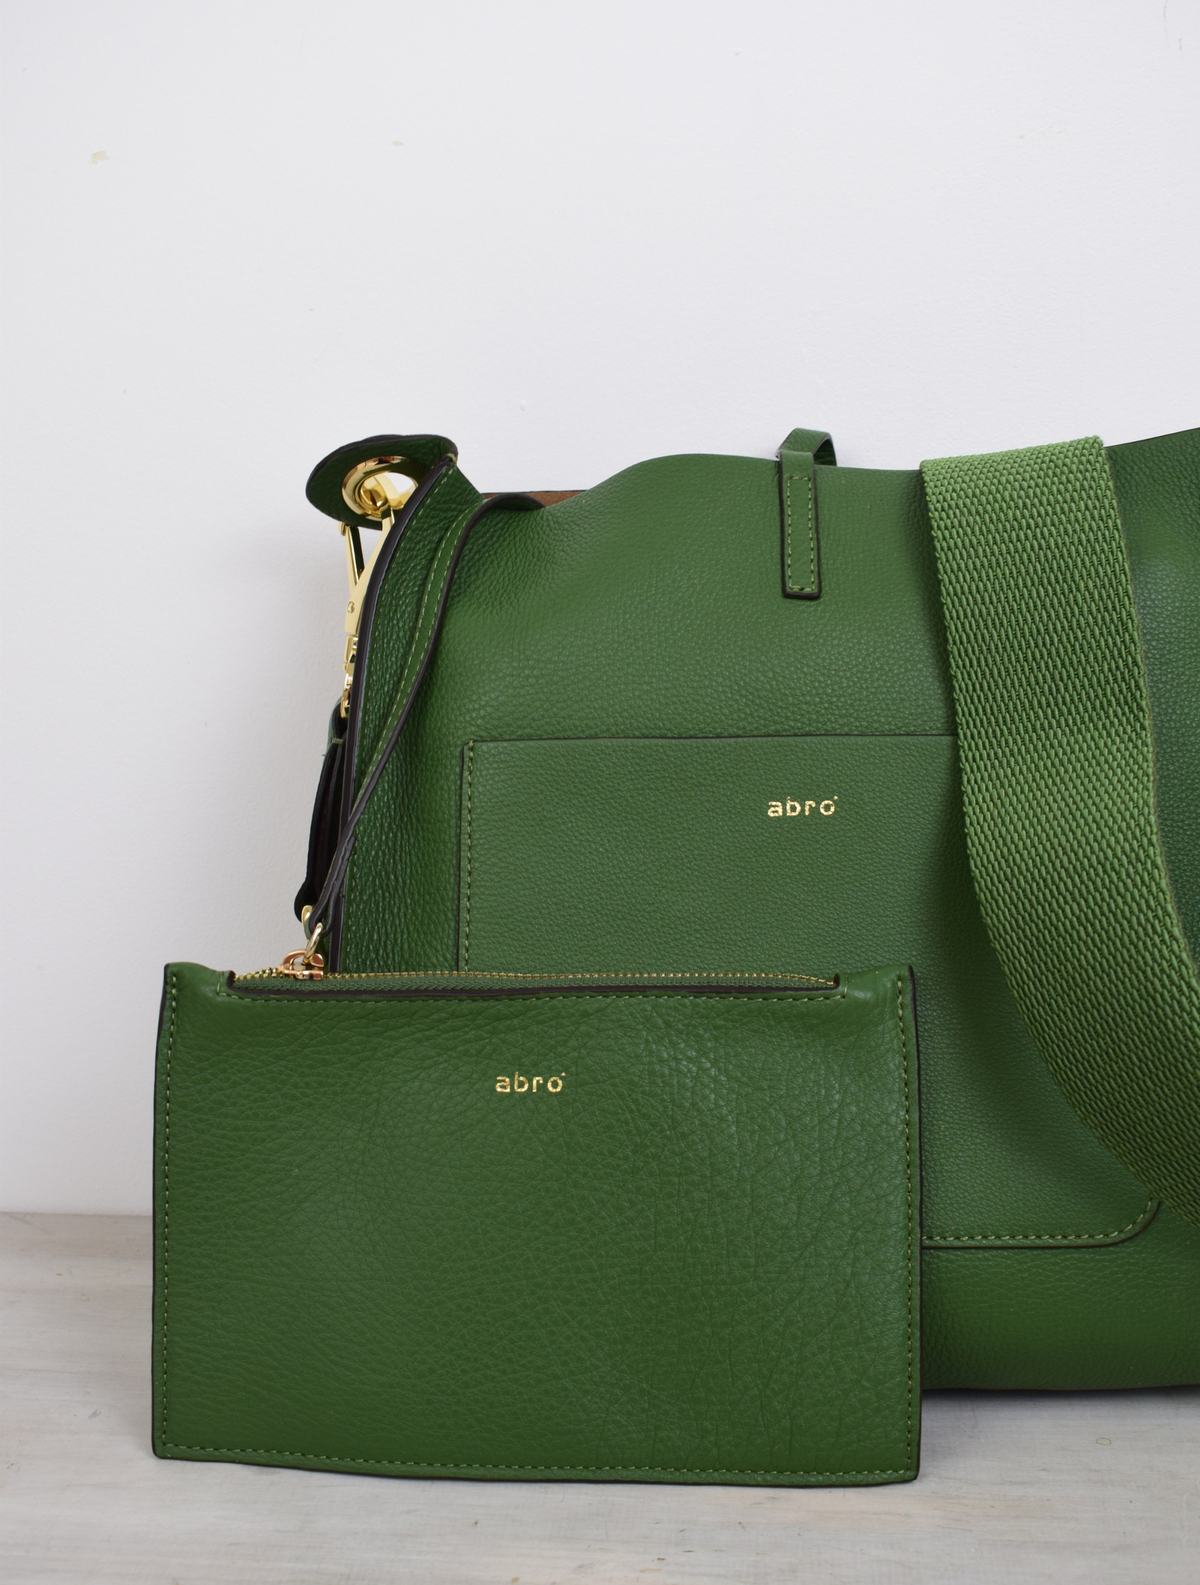 Green leather bag with cross body strap and front pocket detail